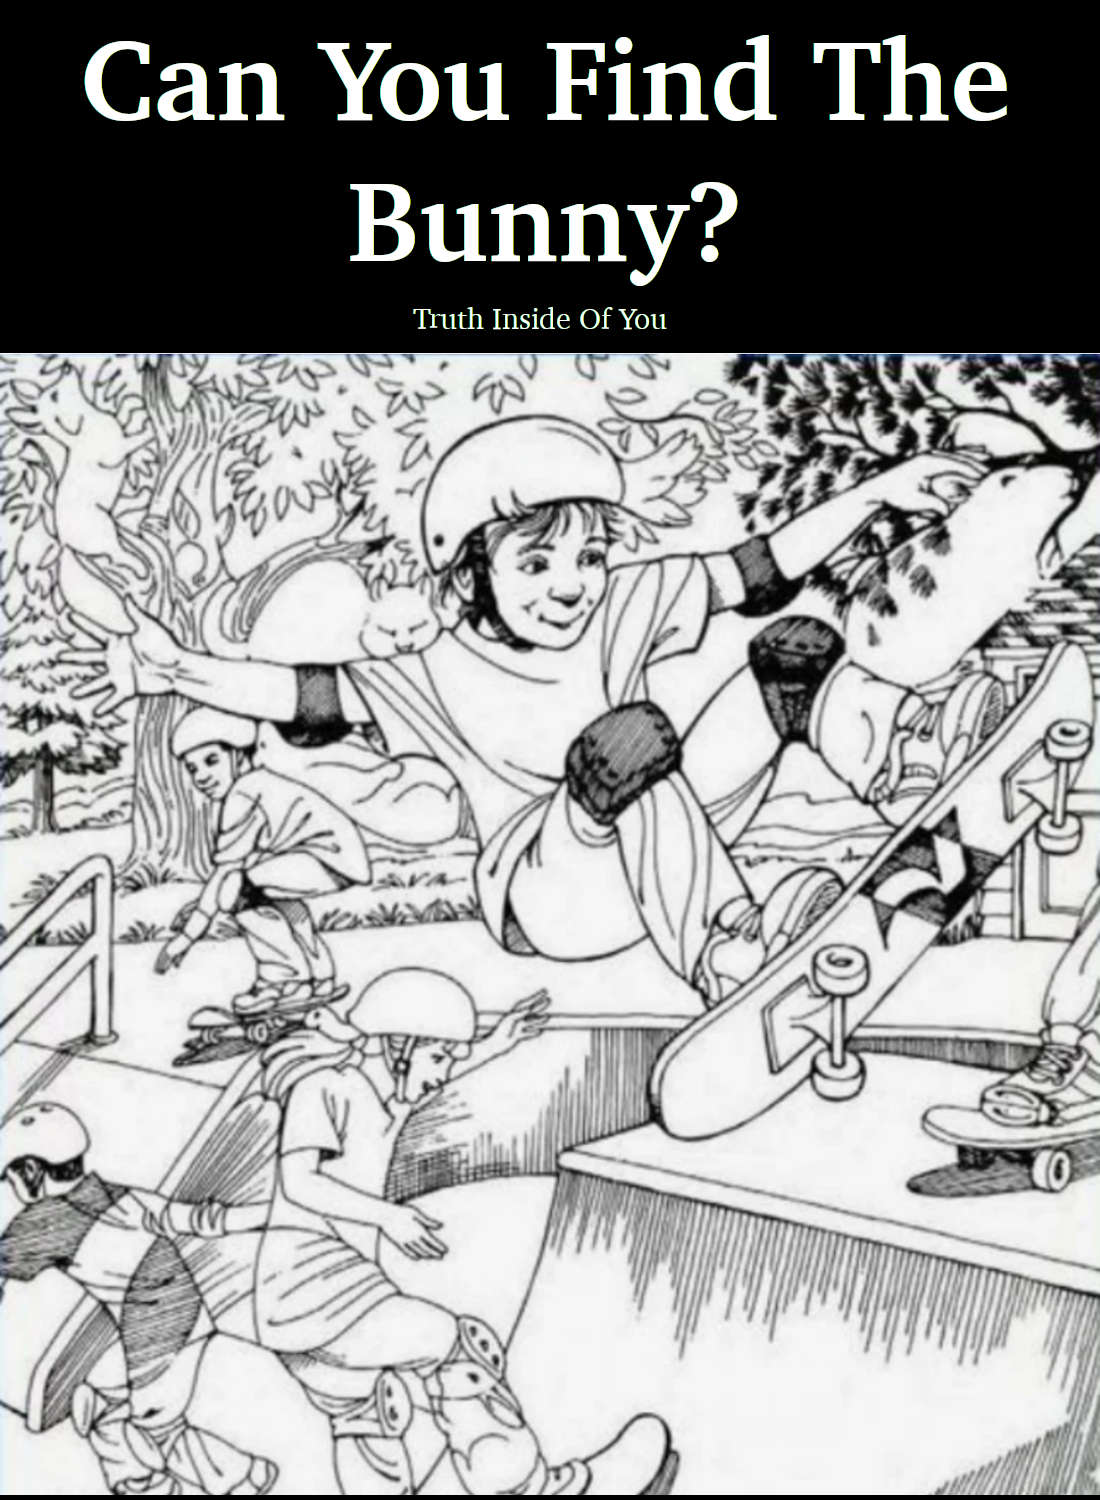 Can You Find The Bunny?